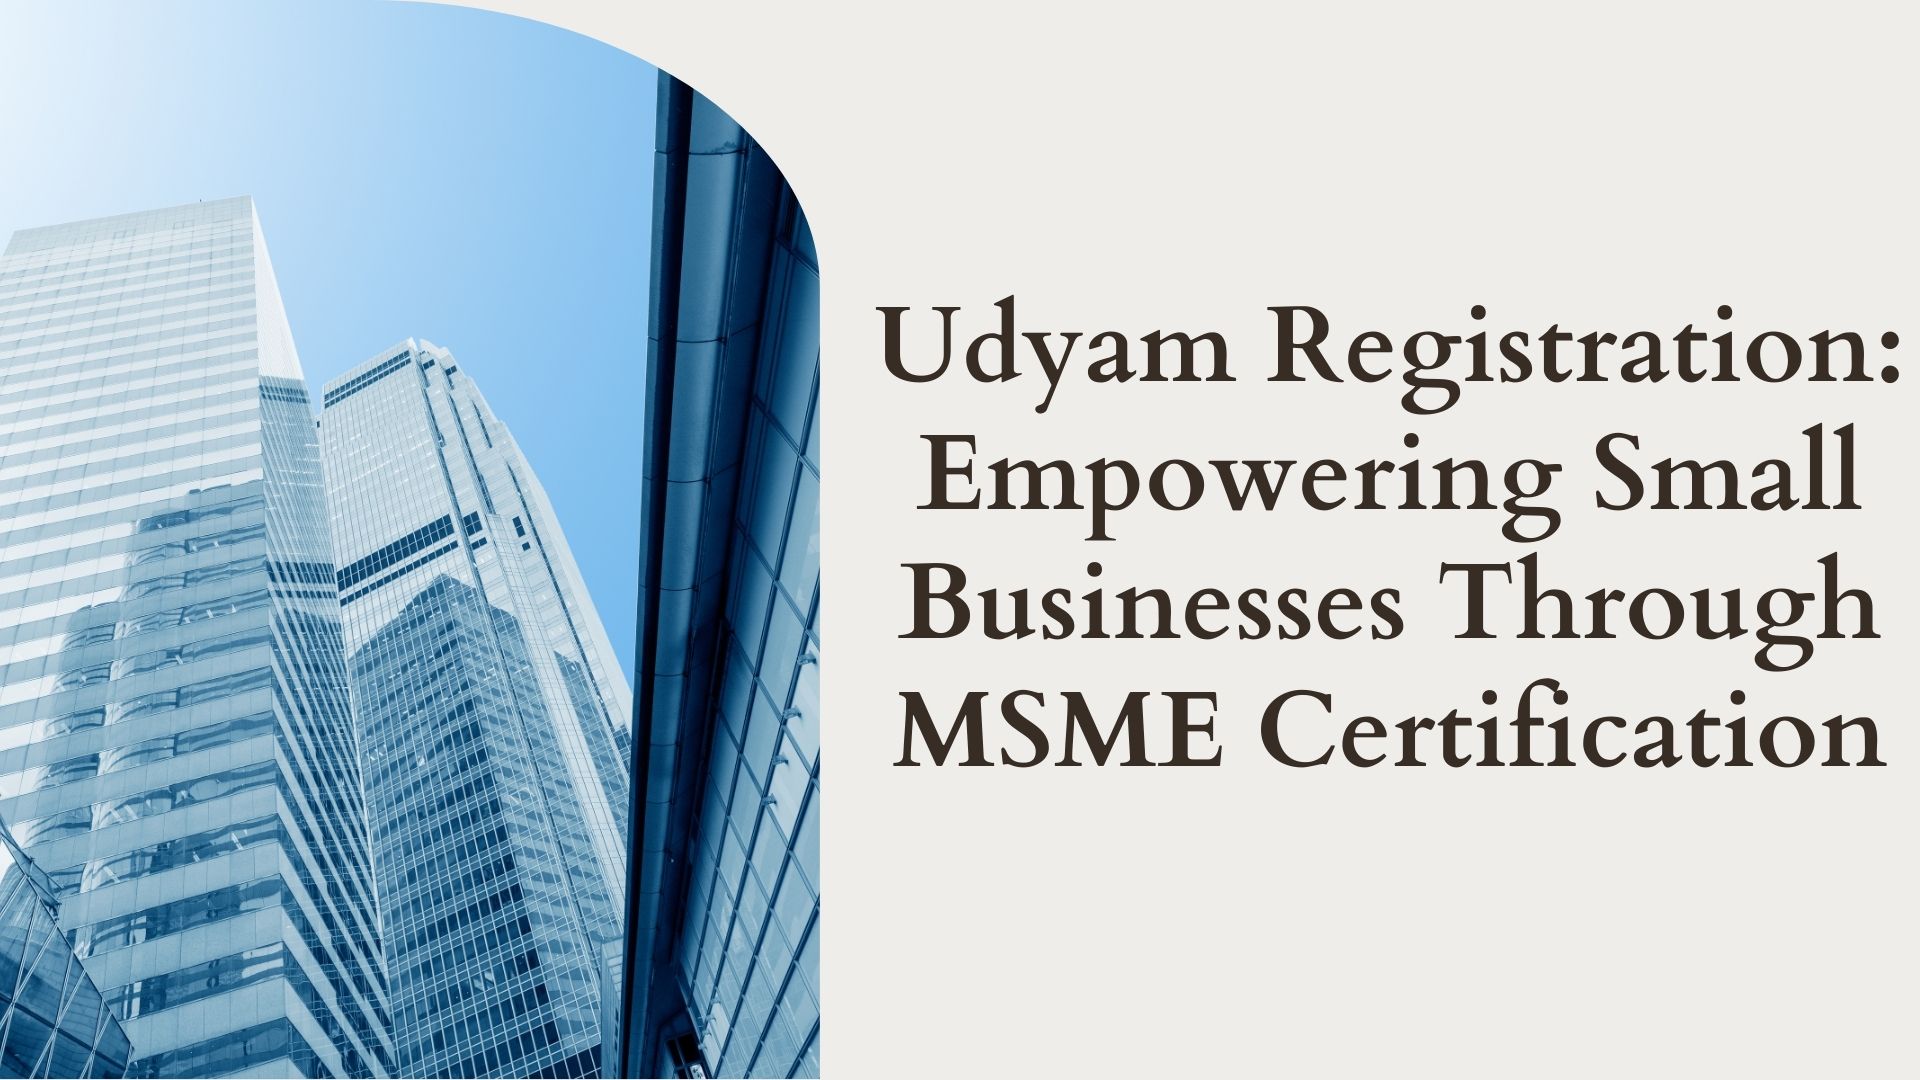 Udyam Registration: Empowering Small Businesses Through MSME Certification